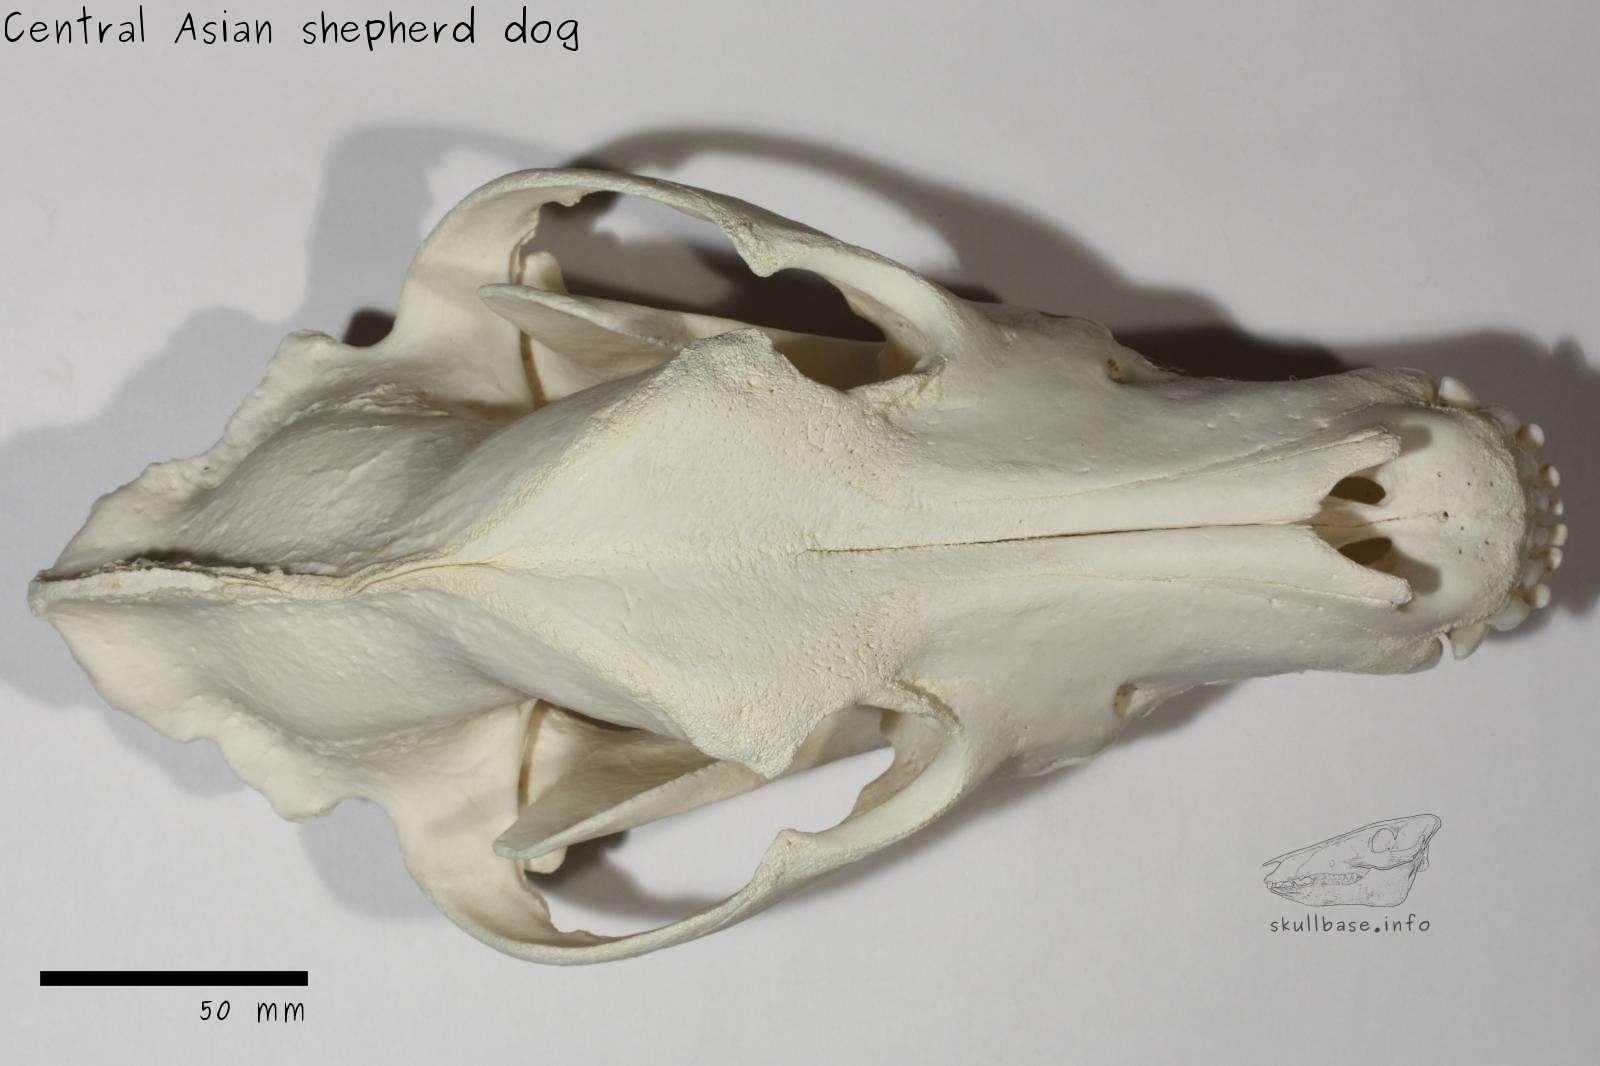 Central Asian shepherd dog (Canis lupus familiaris) skull dorsal view